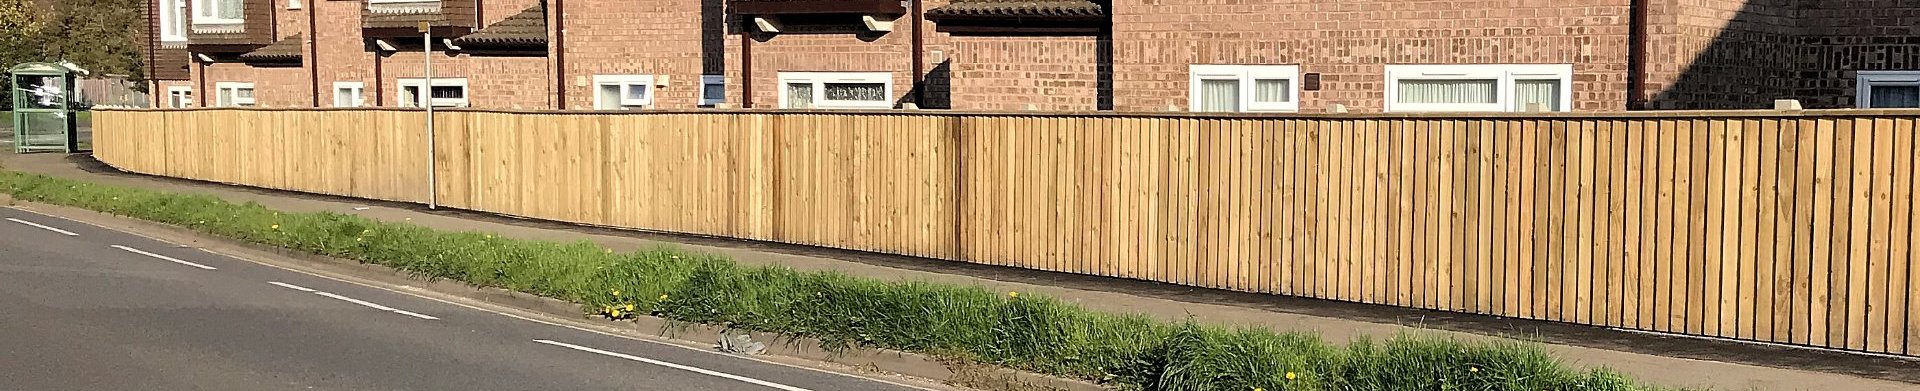 Bespoke fencing created and installed carpentry service Barnstaple North Devon